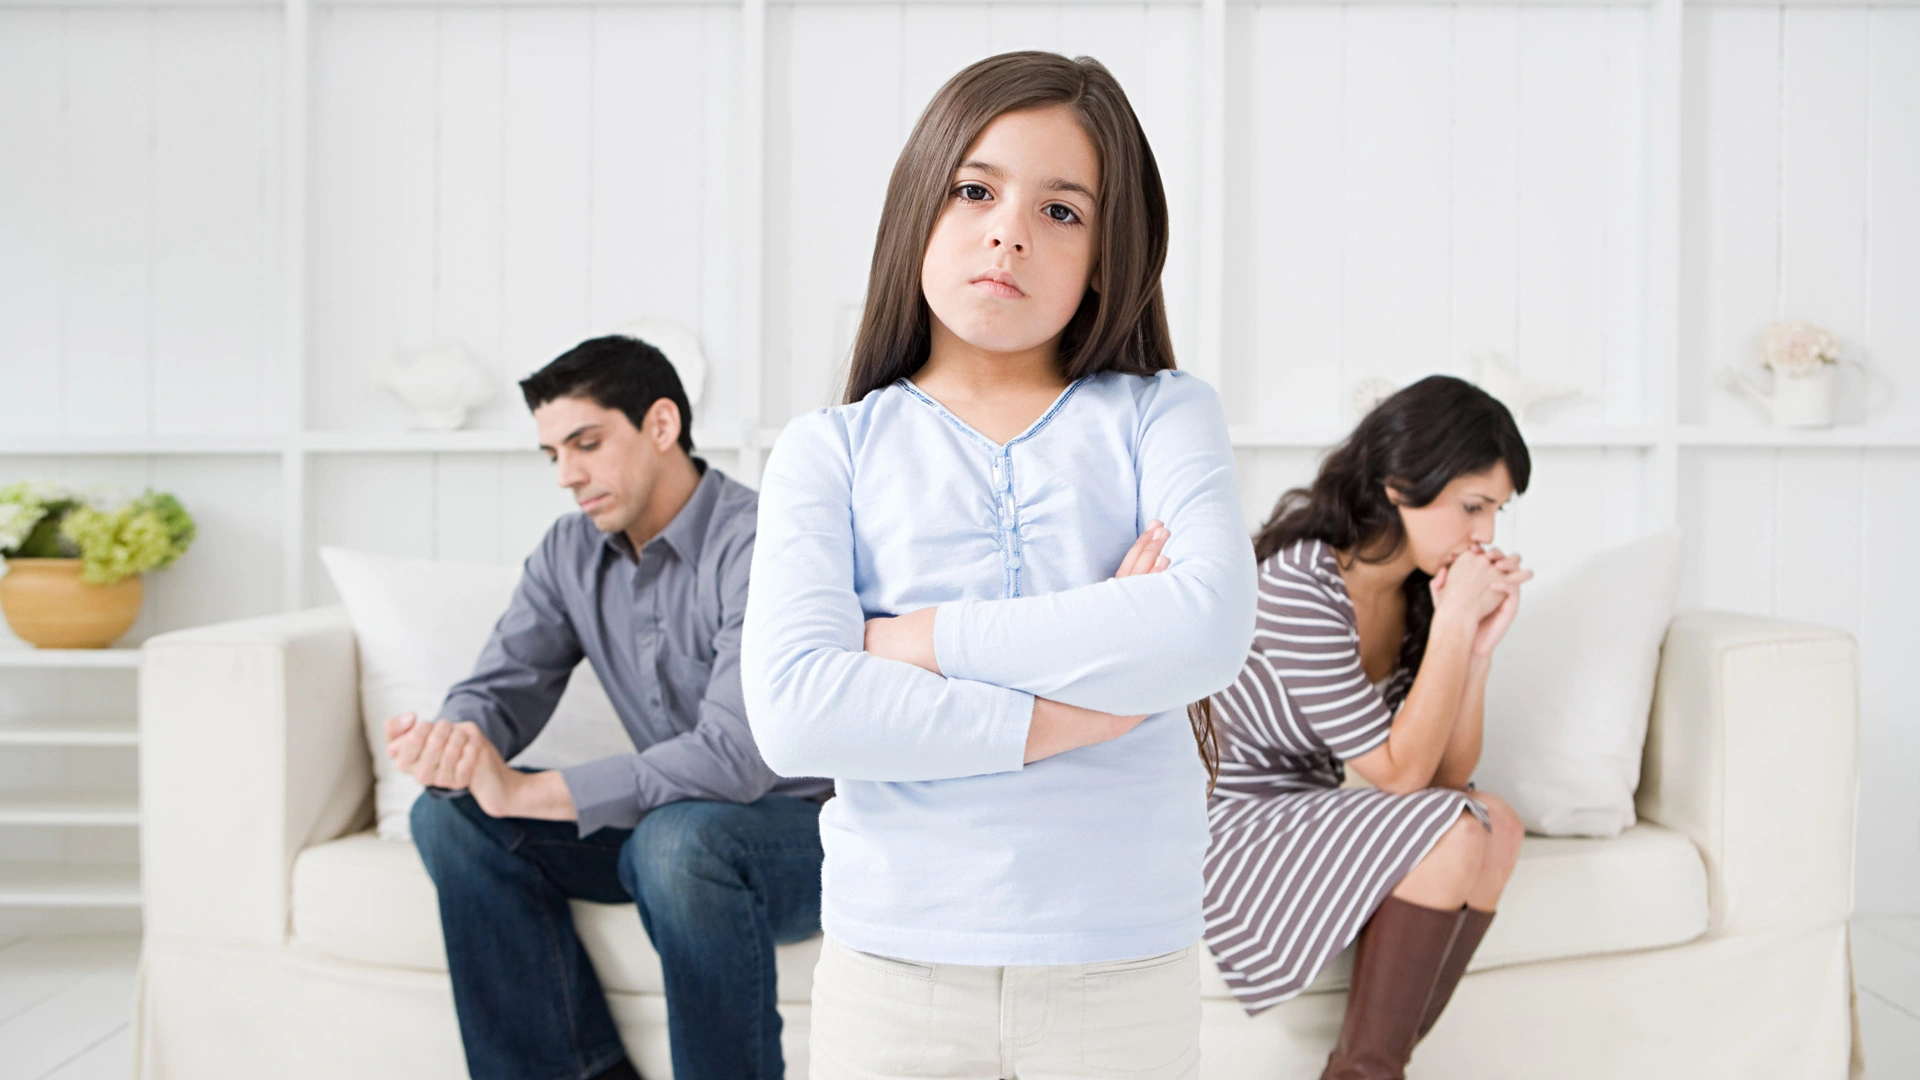 How Does the California Family Court Determine a Child’s Best Interests?